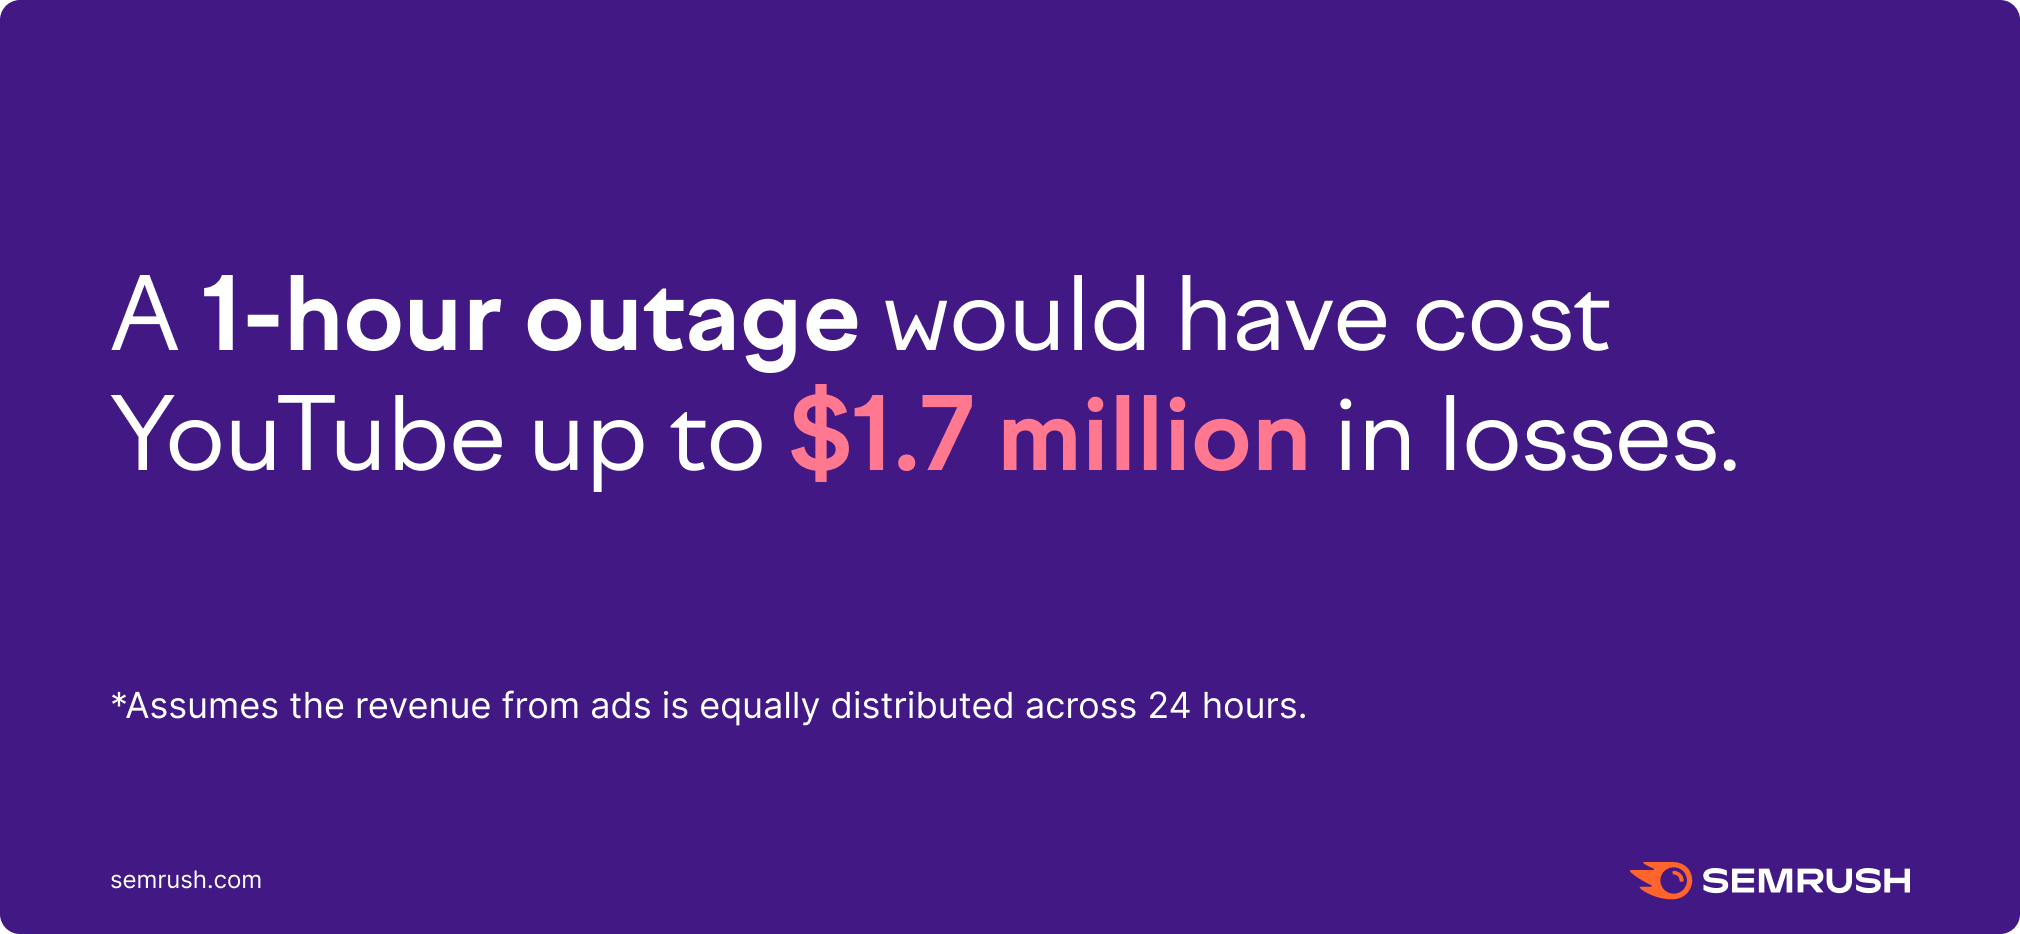 1-hour outage cost for YouTube